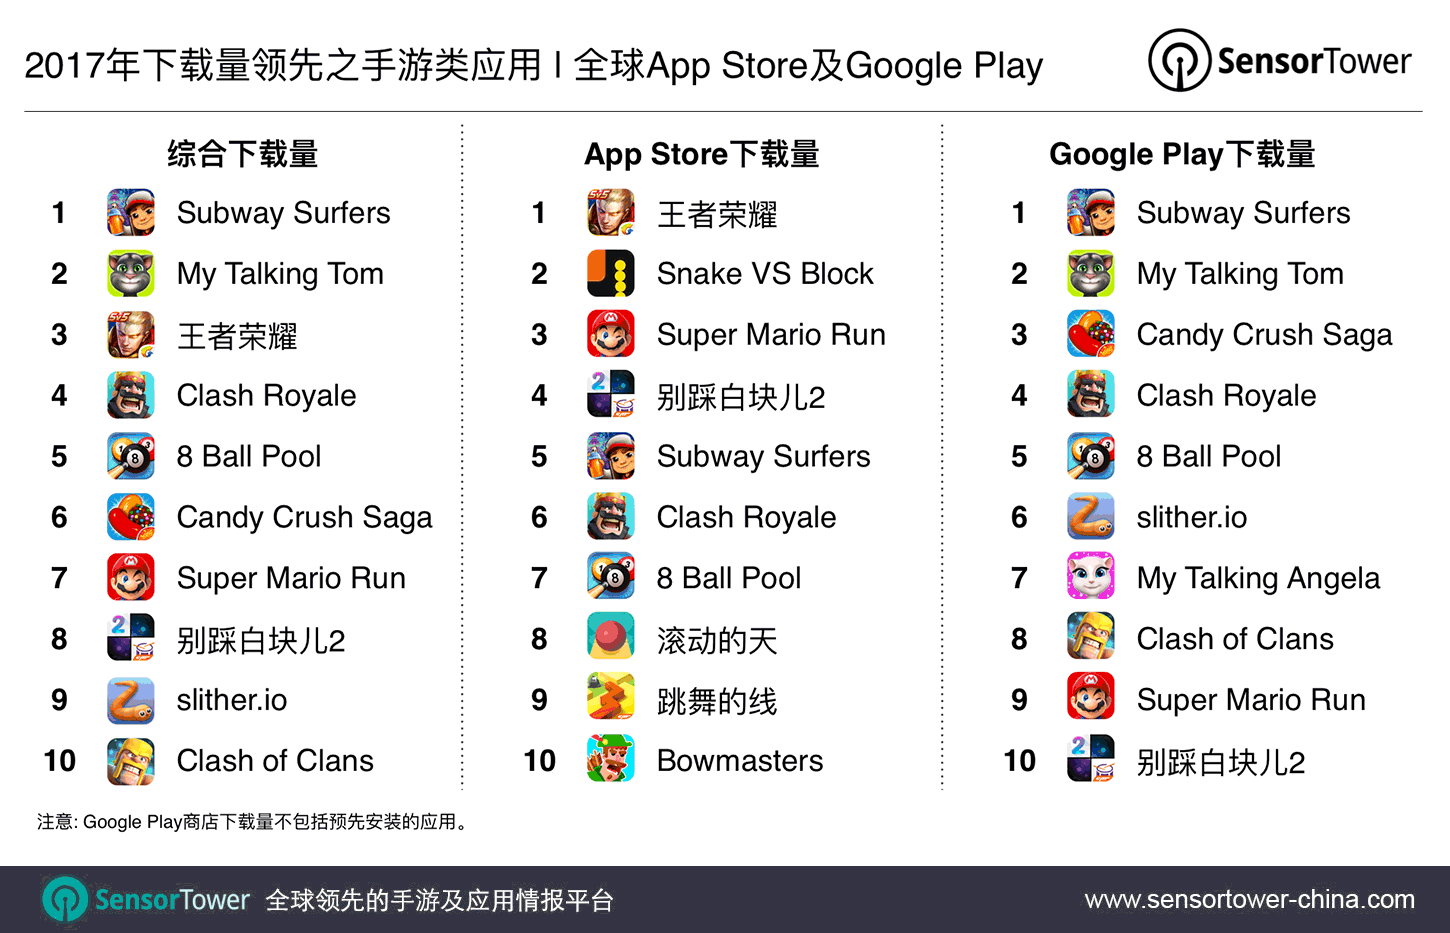 2017's Top Mobile Games by Downloads CN